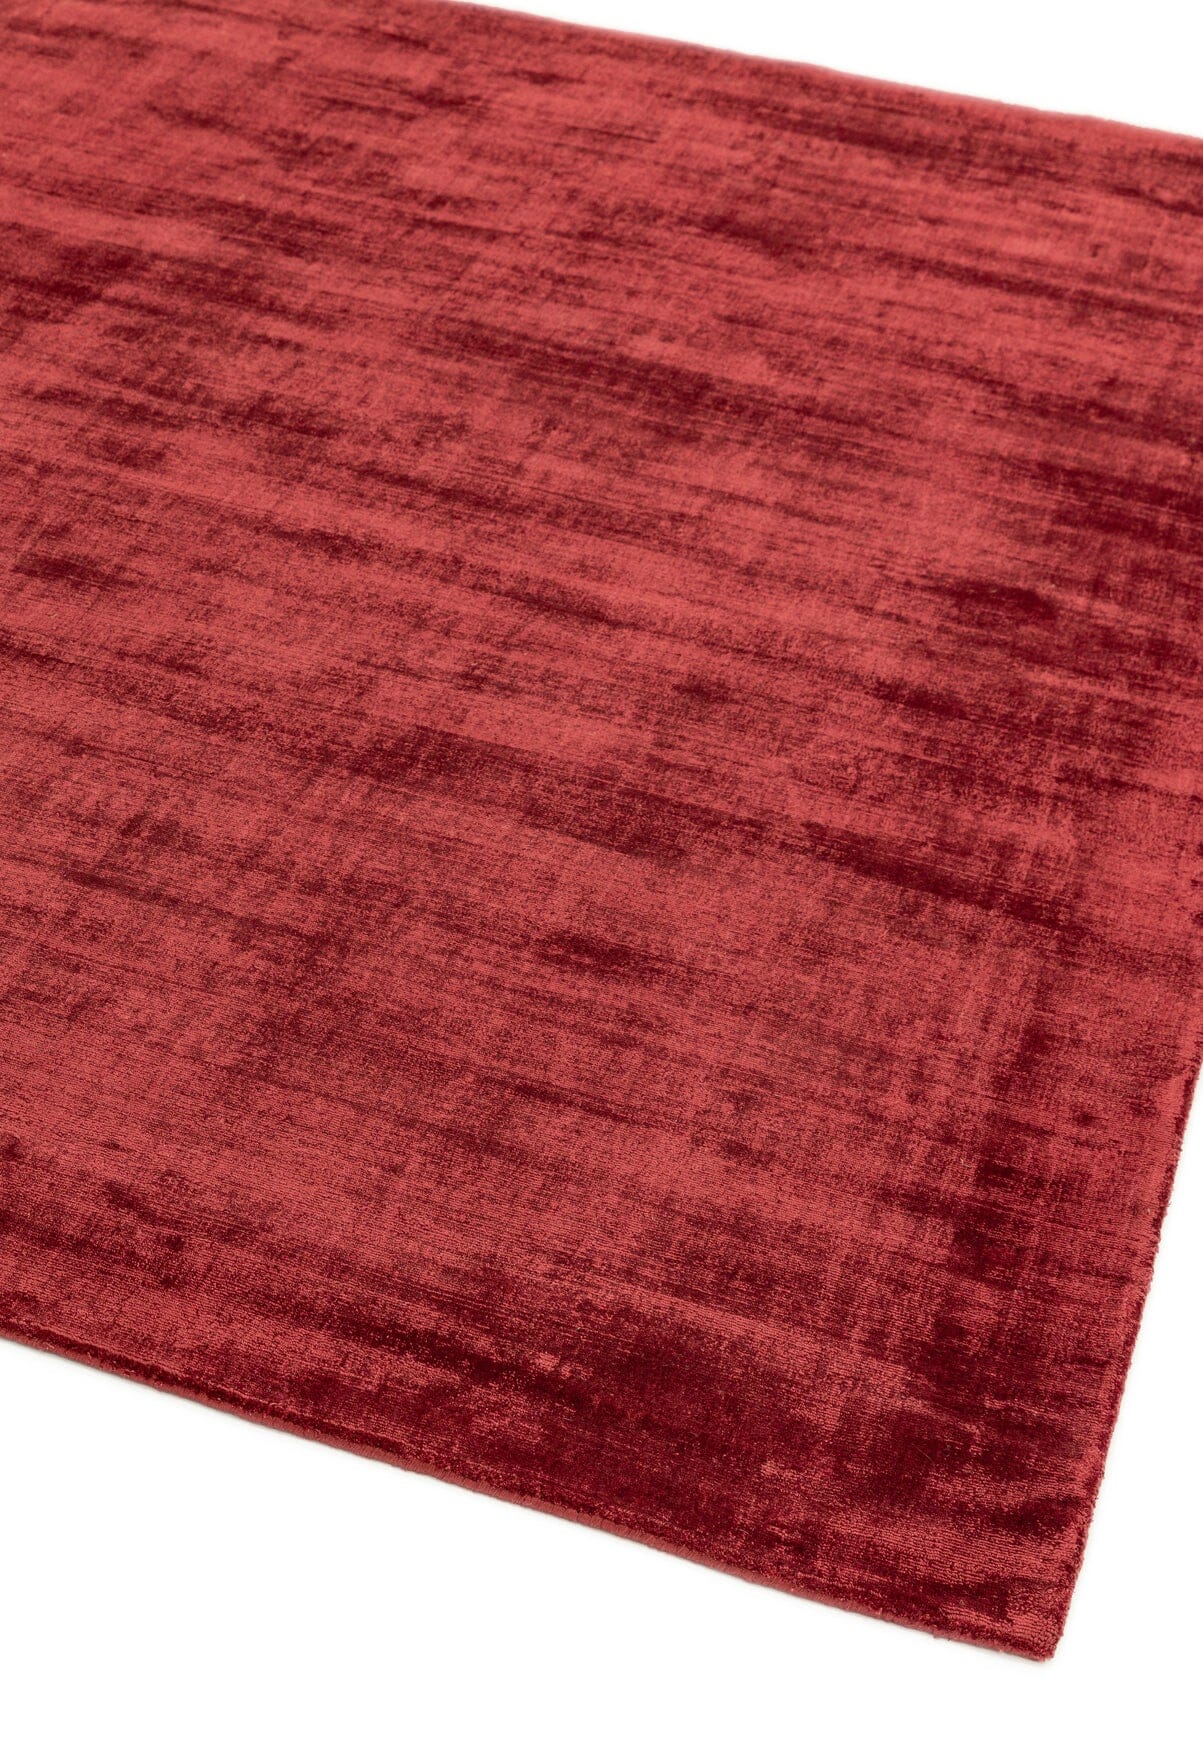  Asiatic Carpets-Asiatic Carpets Blade Hand Woven Runner Berry - 66 x 240cm-Red 277 